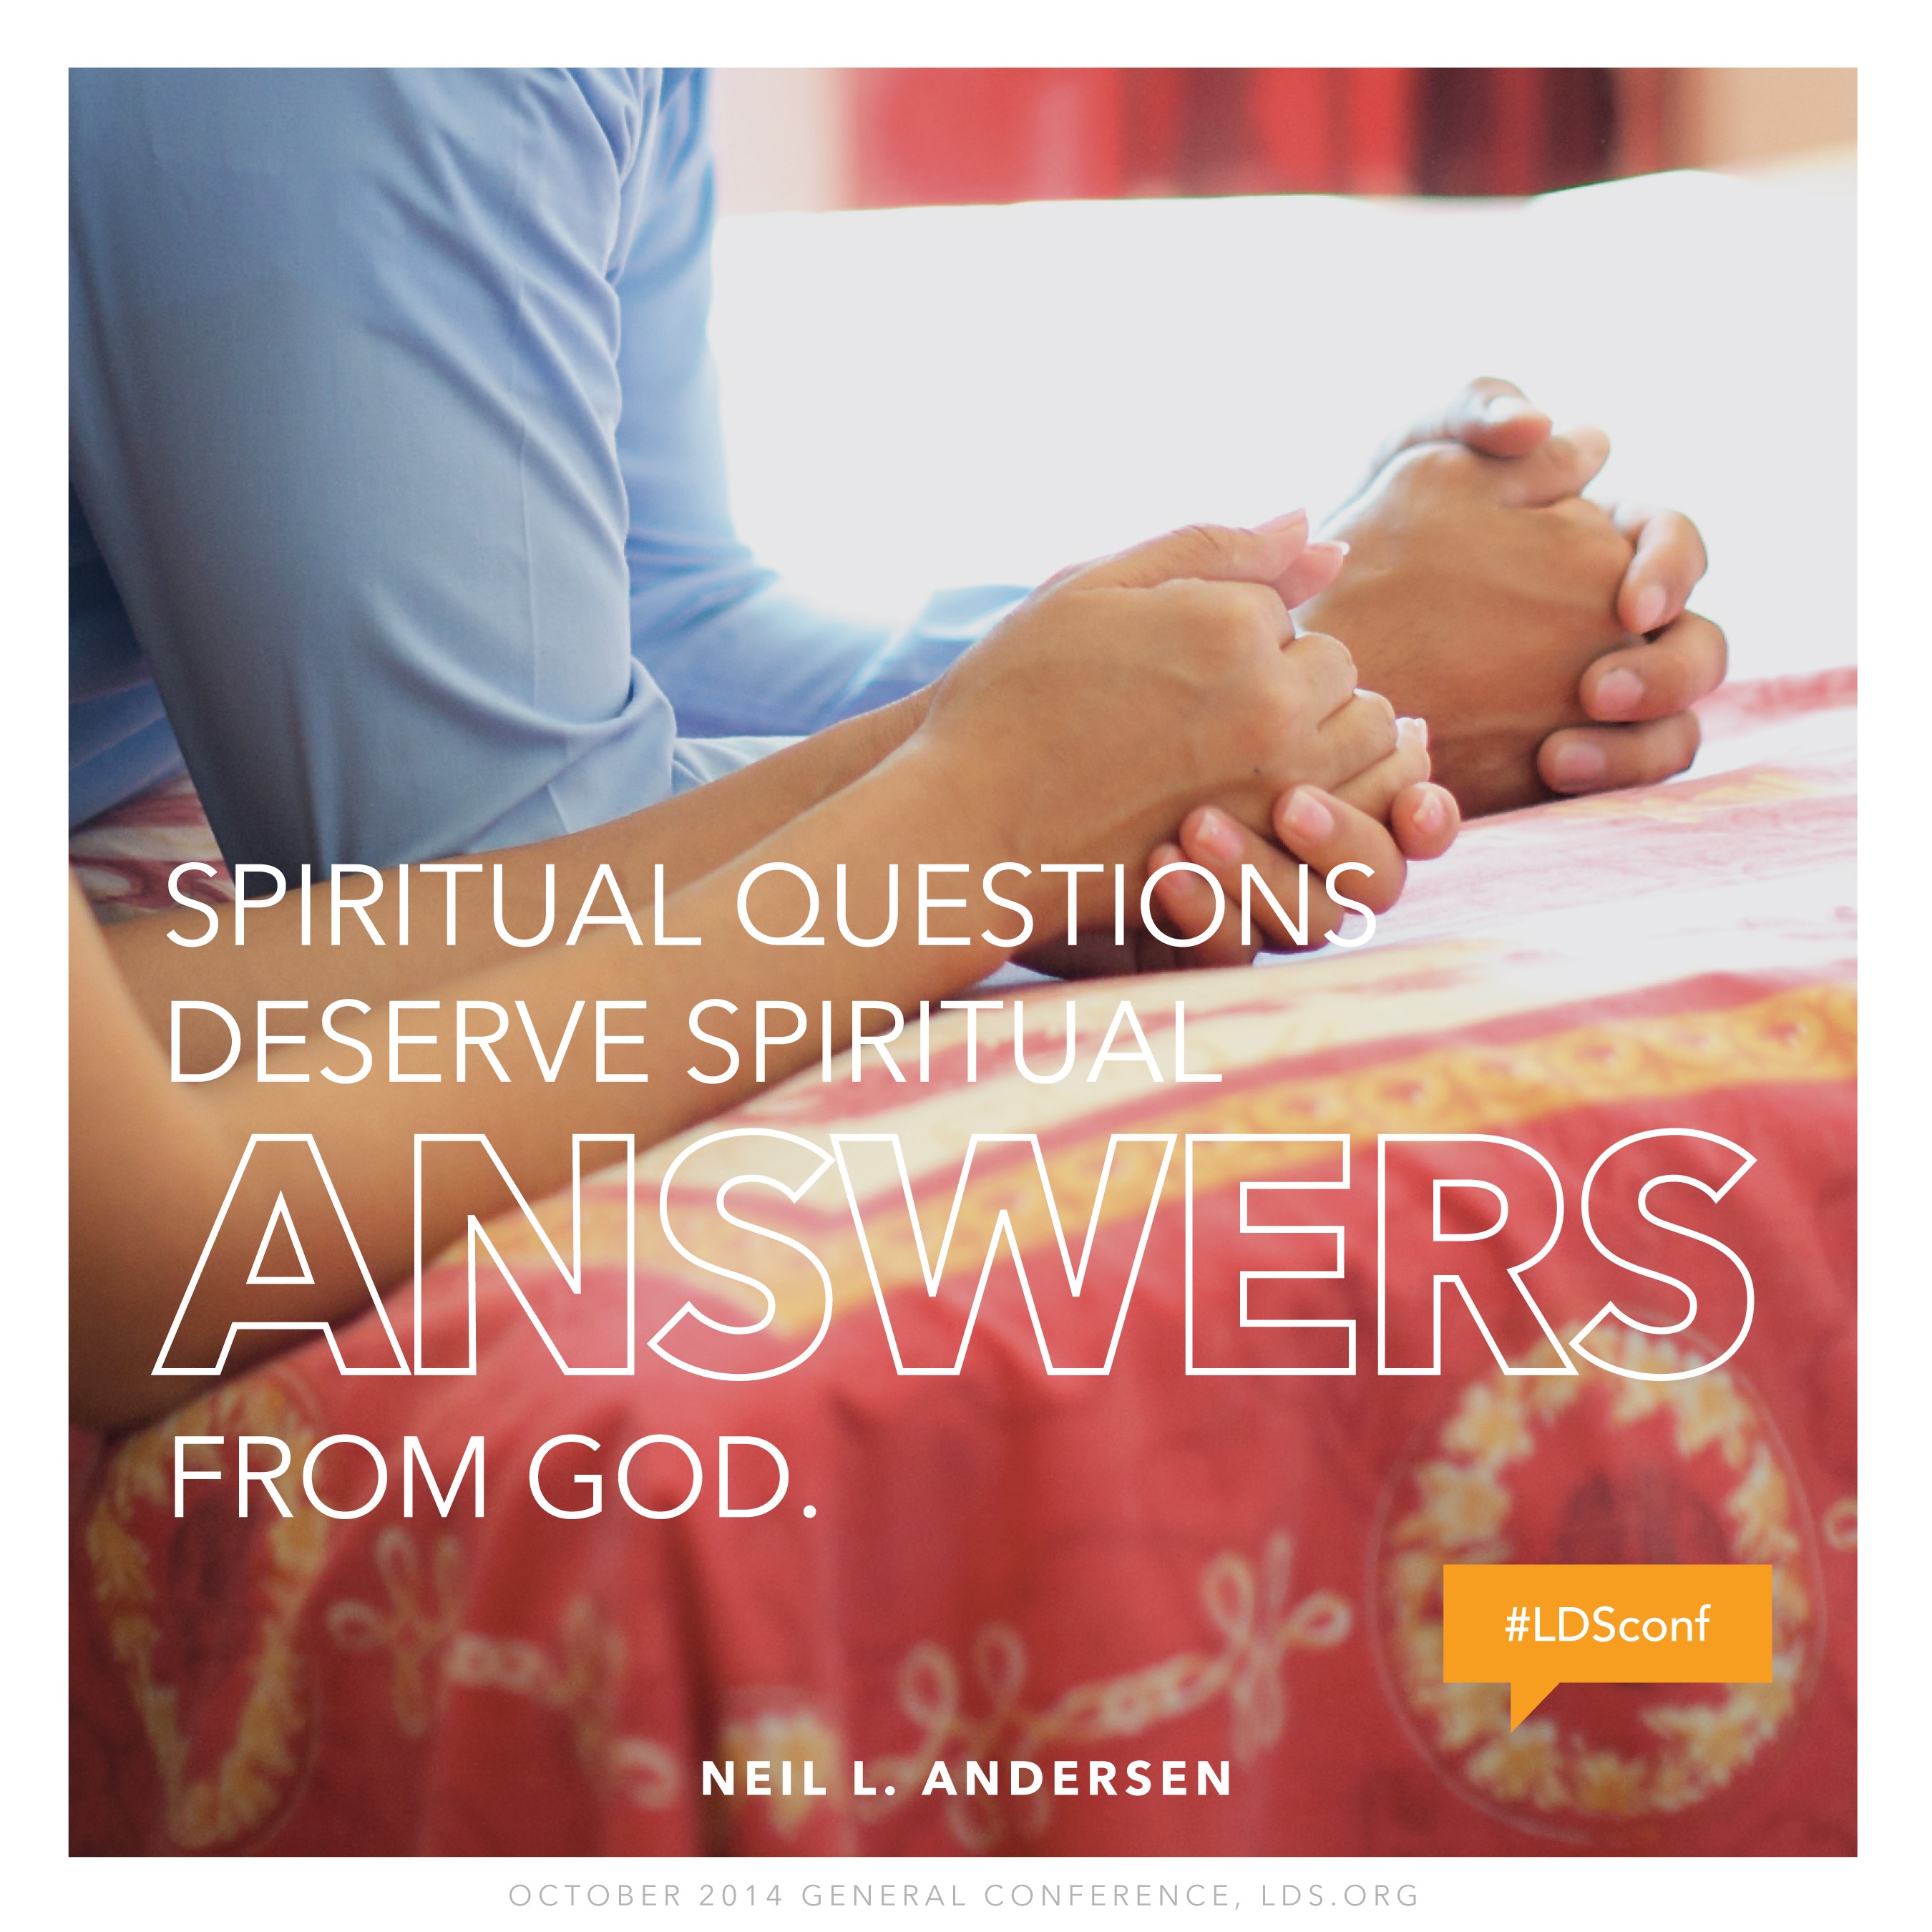 An image of a man’s hands and a woman’s hands folded in prayer, combined with a quote by Elder Neil L. Andersen: “Spiritual questions deserve spiritual answers.”